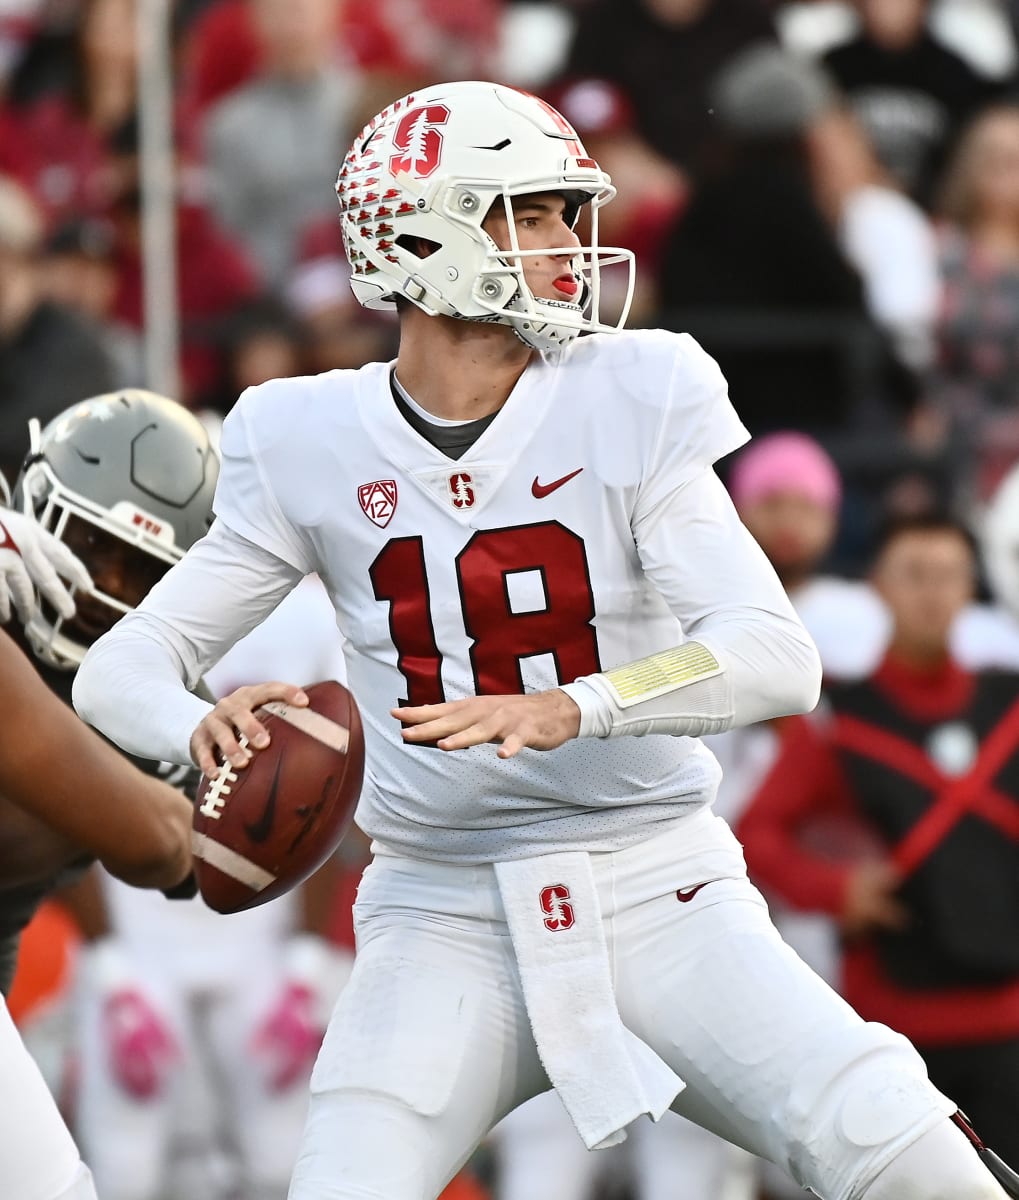 Tanner Mckee Tabbed As One Of The Most Accurate Quarterbacks In The 2023 Nfl Draft Class Bvm 